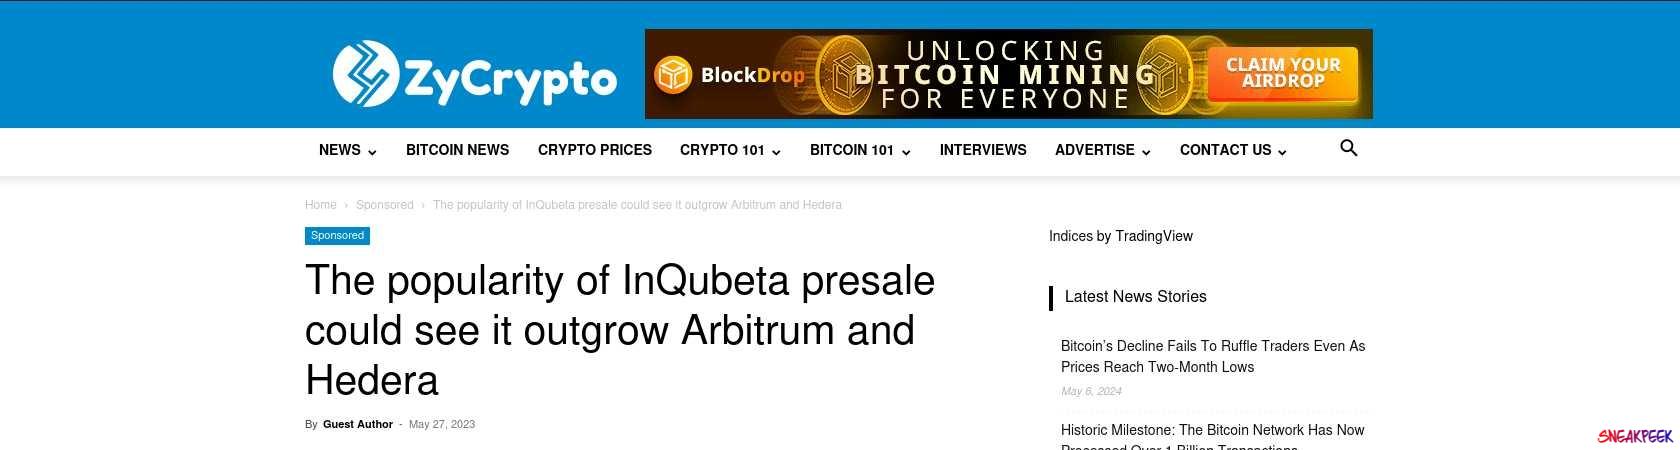 Read the full Article:  ⭲ The popularity of InQubeta presale could see it outgrow Arbitrum and Hedera